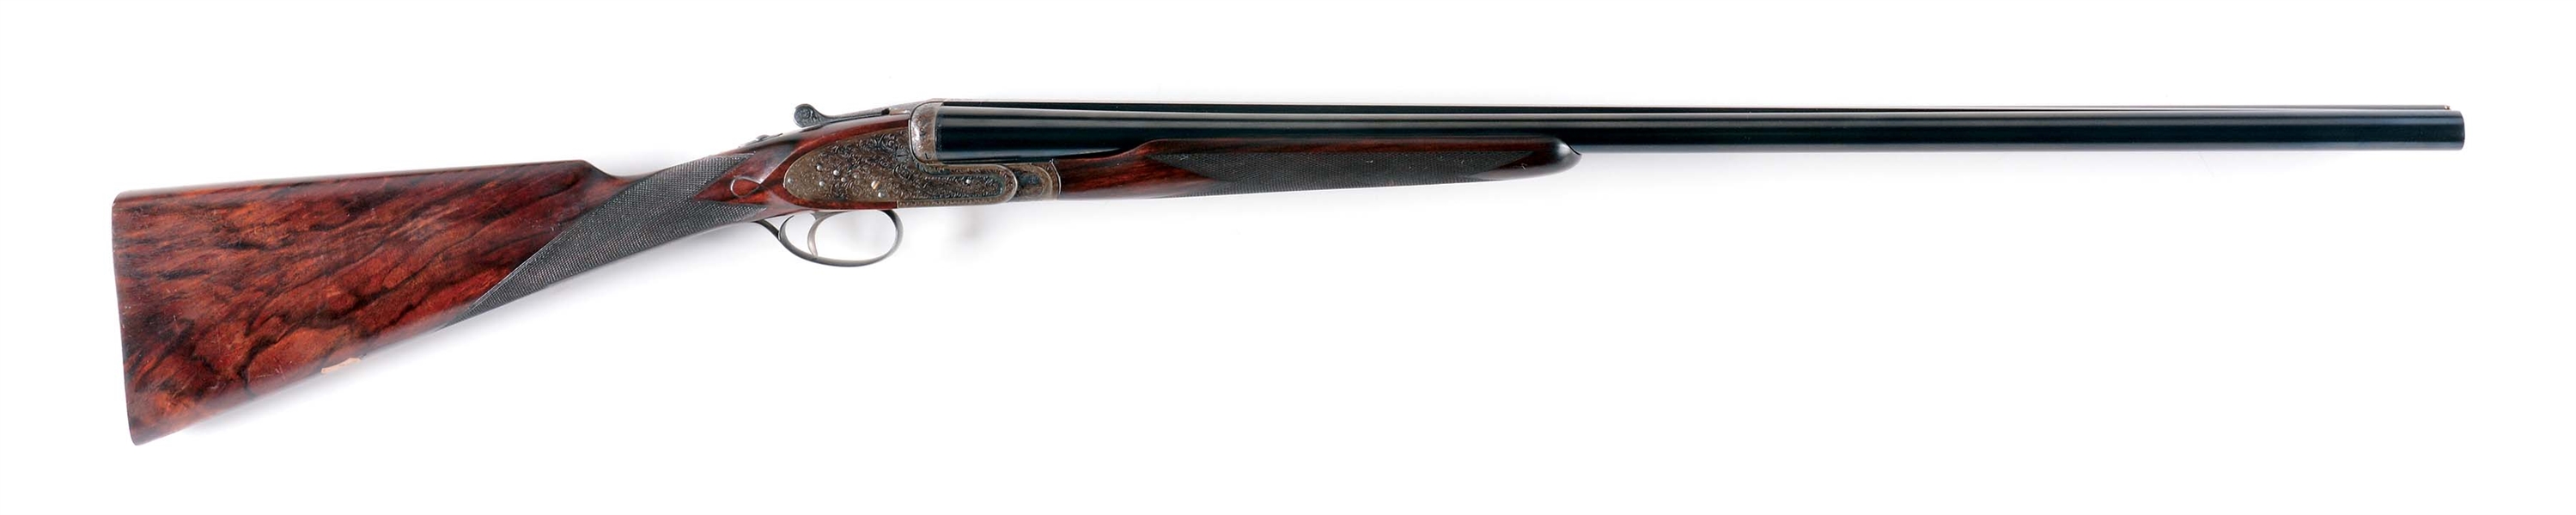 (C) FINE WESTLEY RICHARDS SXS SHOTGUN MADE FOR ABERCROMBIE & FITCH.